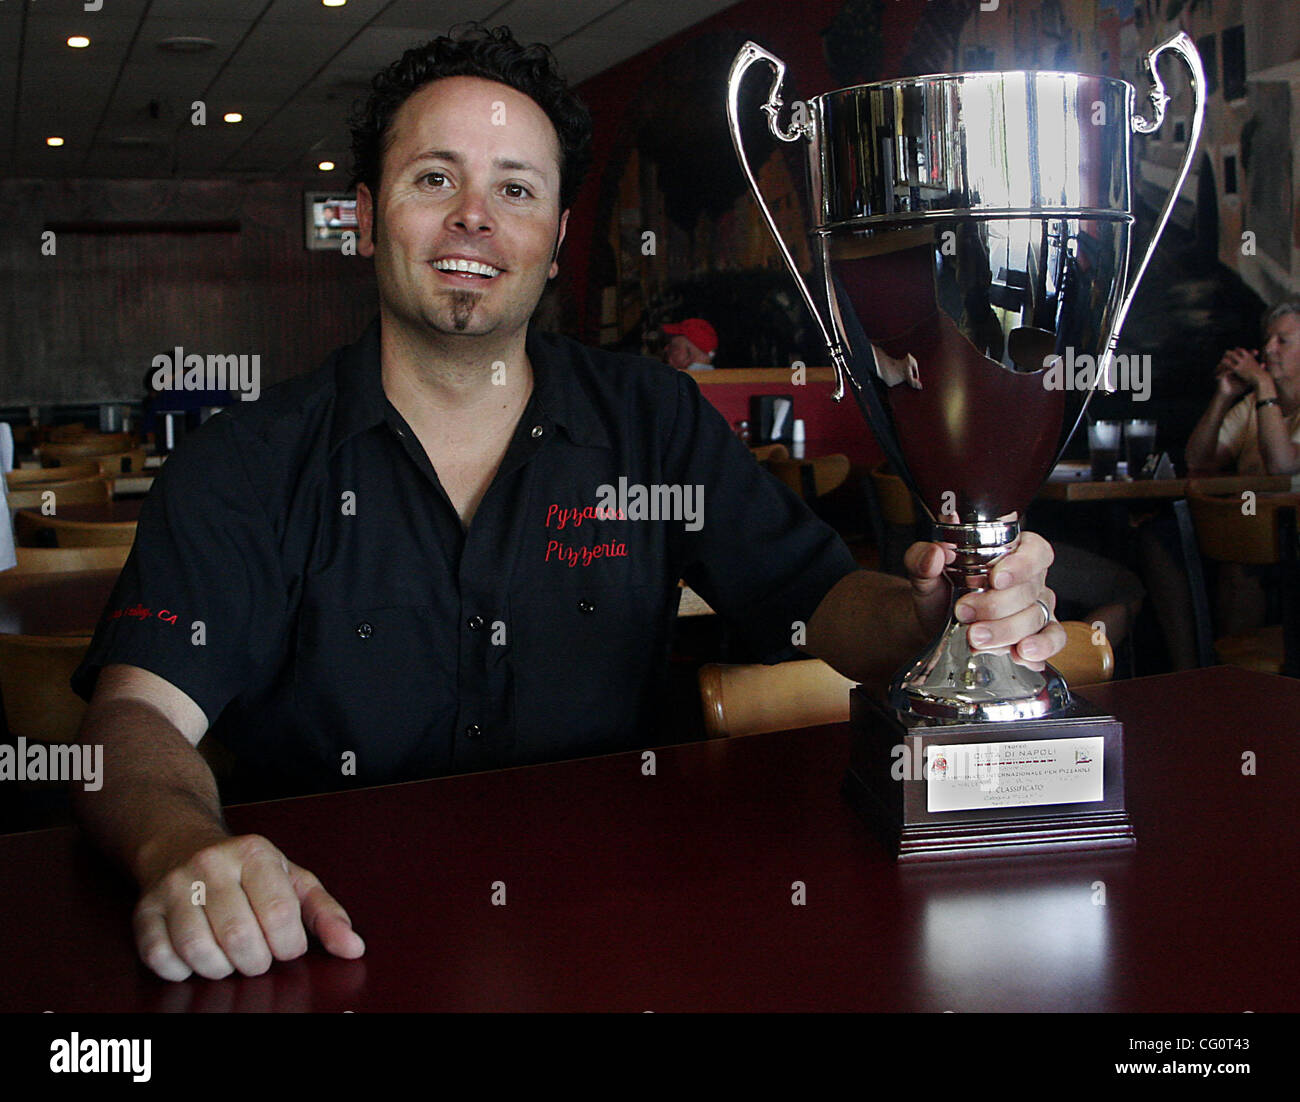 Tony Gemignani, recent winner of the World Pizza Cup pizza cooking contest in Naples, Italy, poses with his trophy at Pyzano's Pizza in Castro Valley, Calif. on Friday, July 13, 2007.  (Dean Coppola/Contra Costa Times) Stock Photo